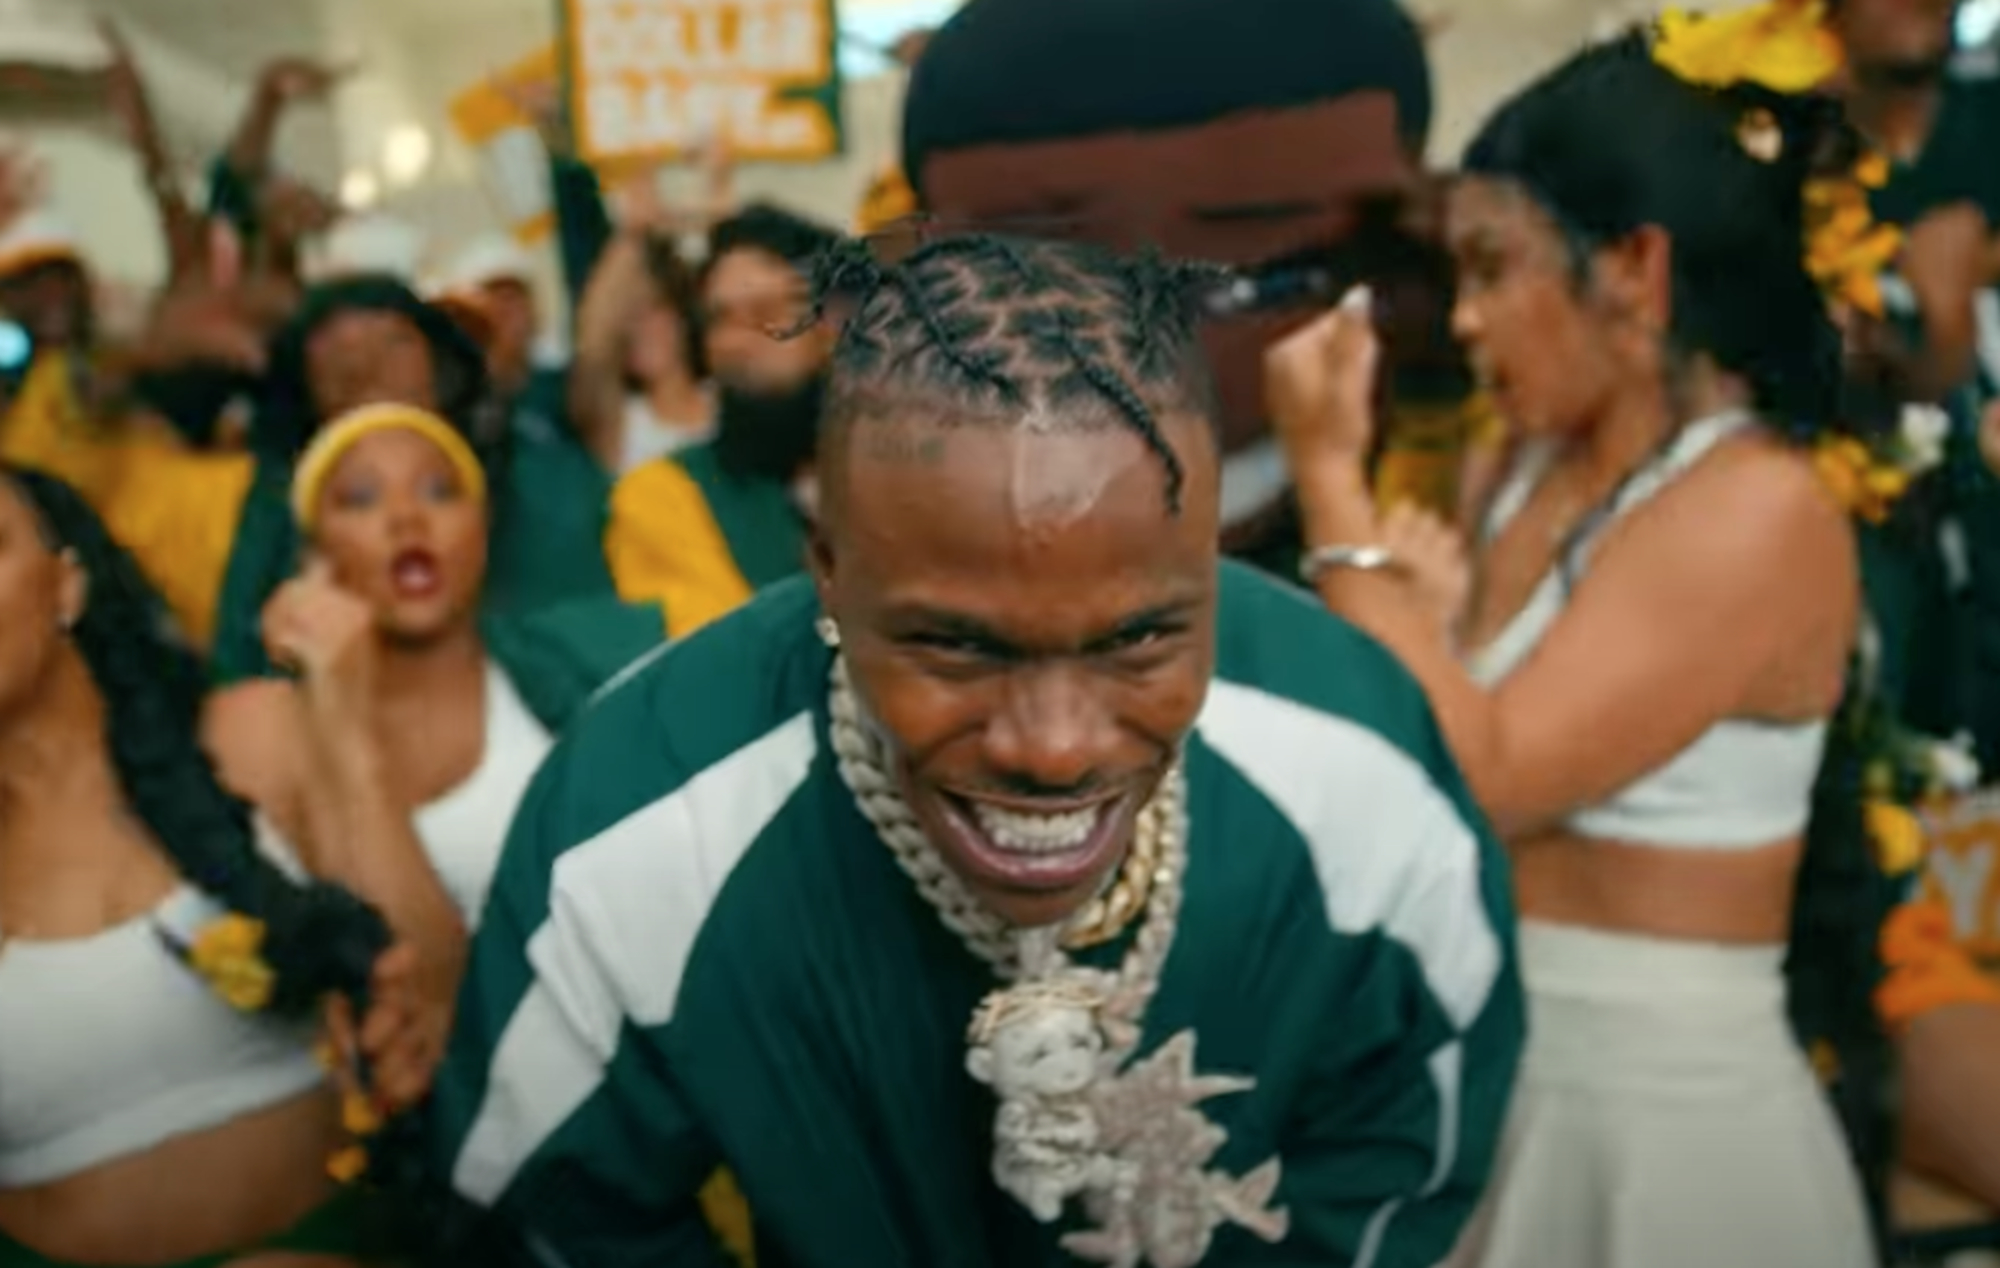 DaBaby Drops Video for New Song 'Ball If I Want To': Watch